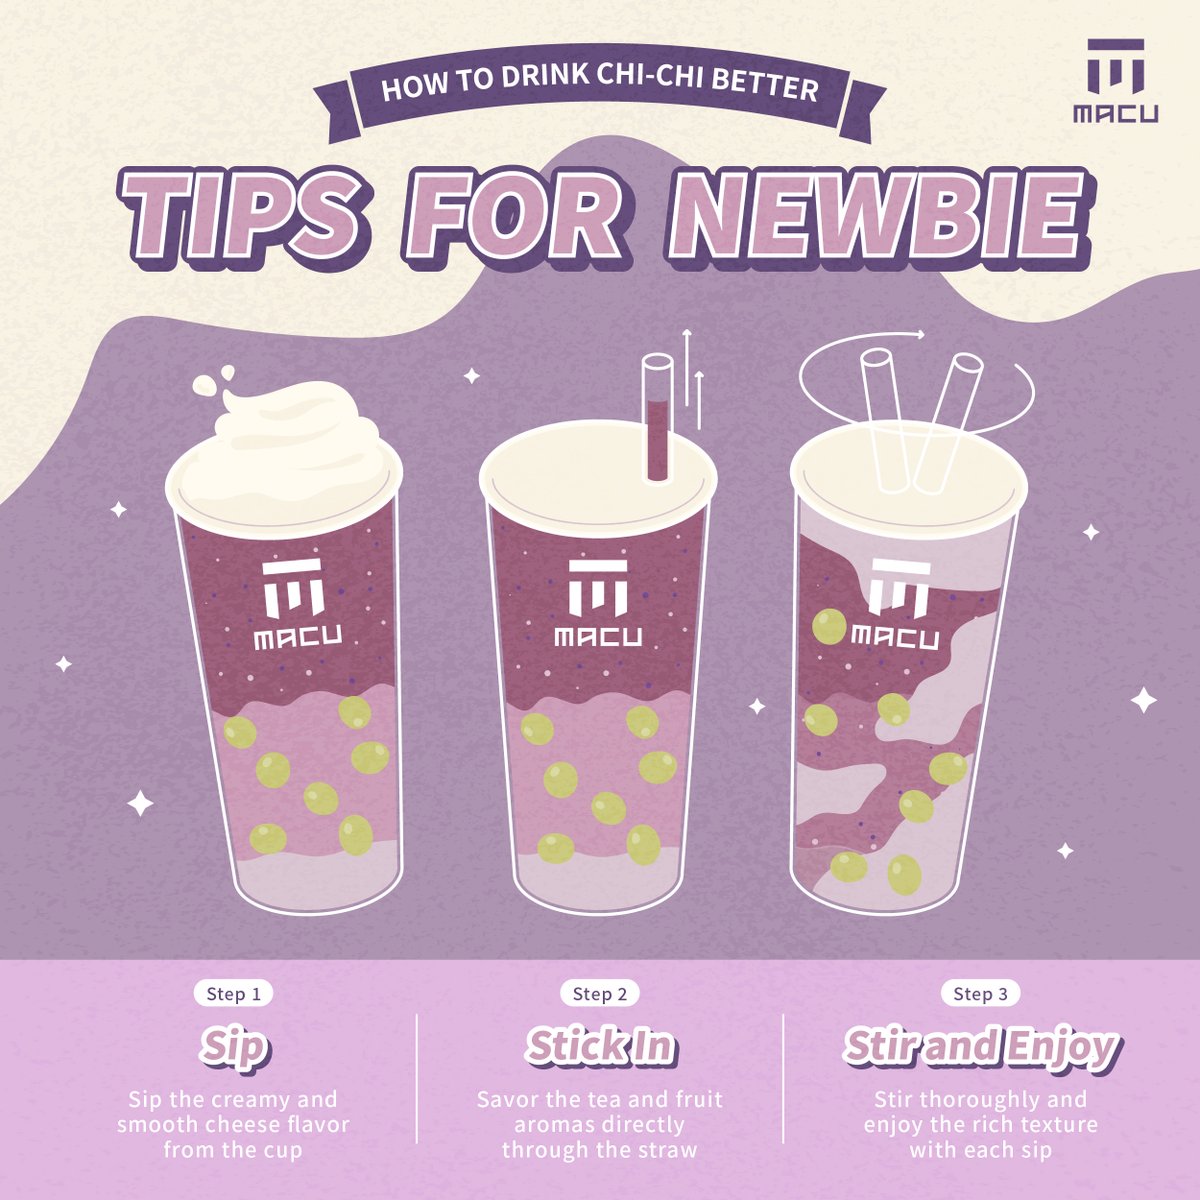 You must know our best drinking dessert Chi-Chi Series. But do you know how to drink it better?🧐Here's the tip for Chi-Chi's newbie 
Just remember 3️⃣S Sip-Stick-Stir and you're ready to go. Come to MACU and pick your favorite Chi-Chi🧋  

#MACUTea #ChiChiSeries #BestDrinks #Tip